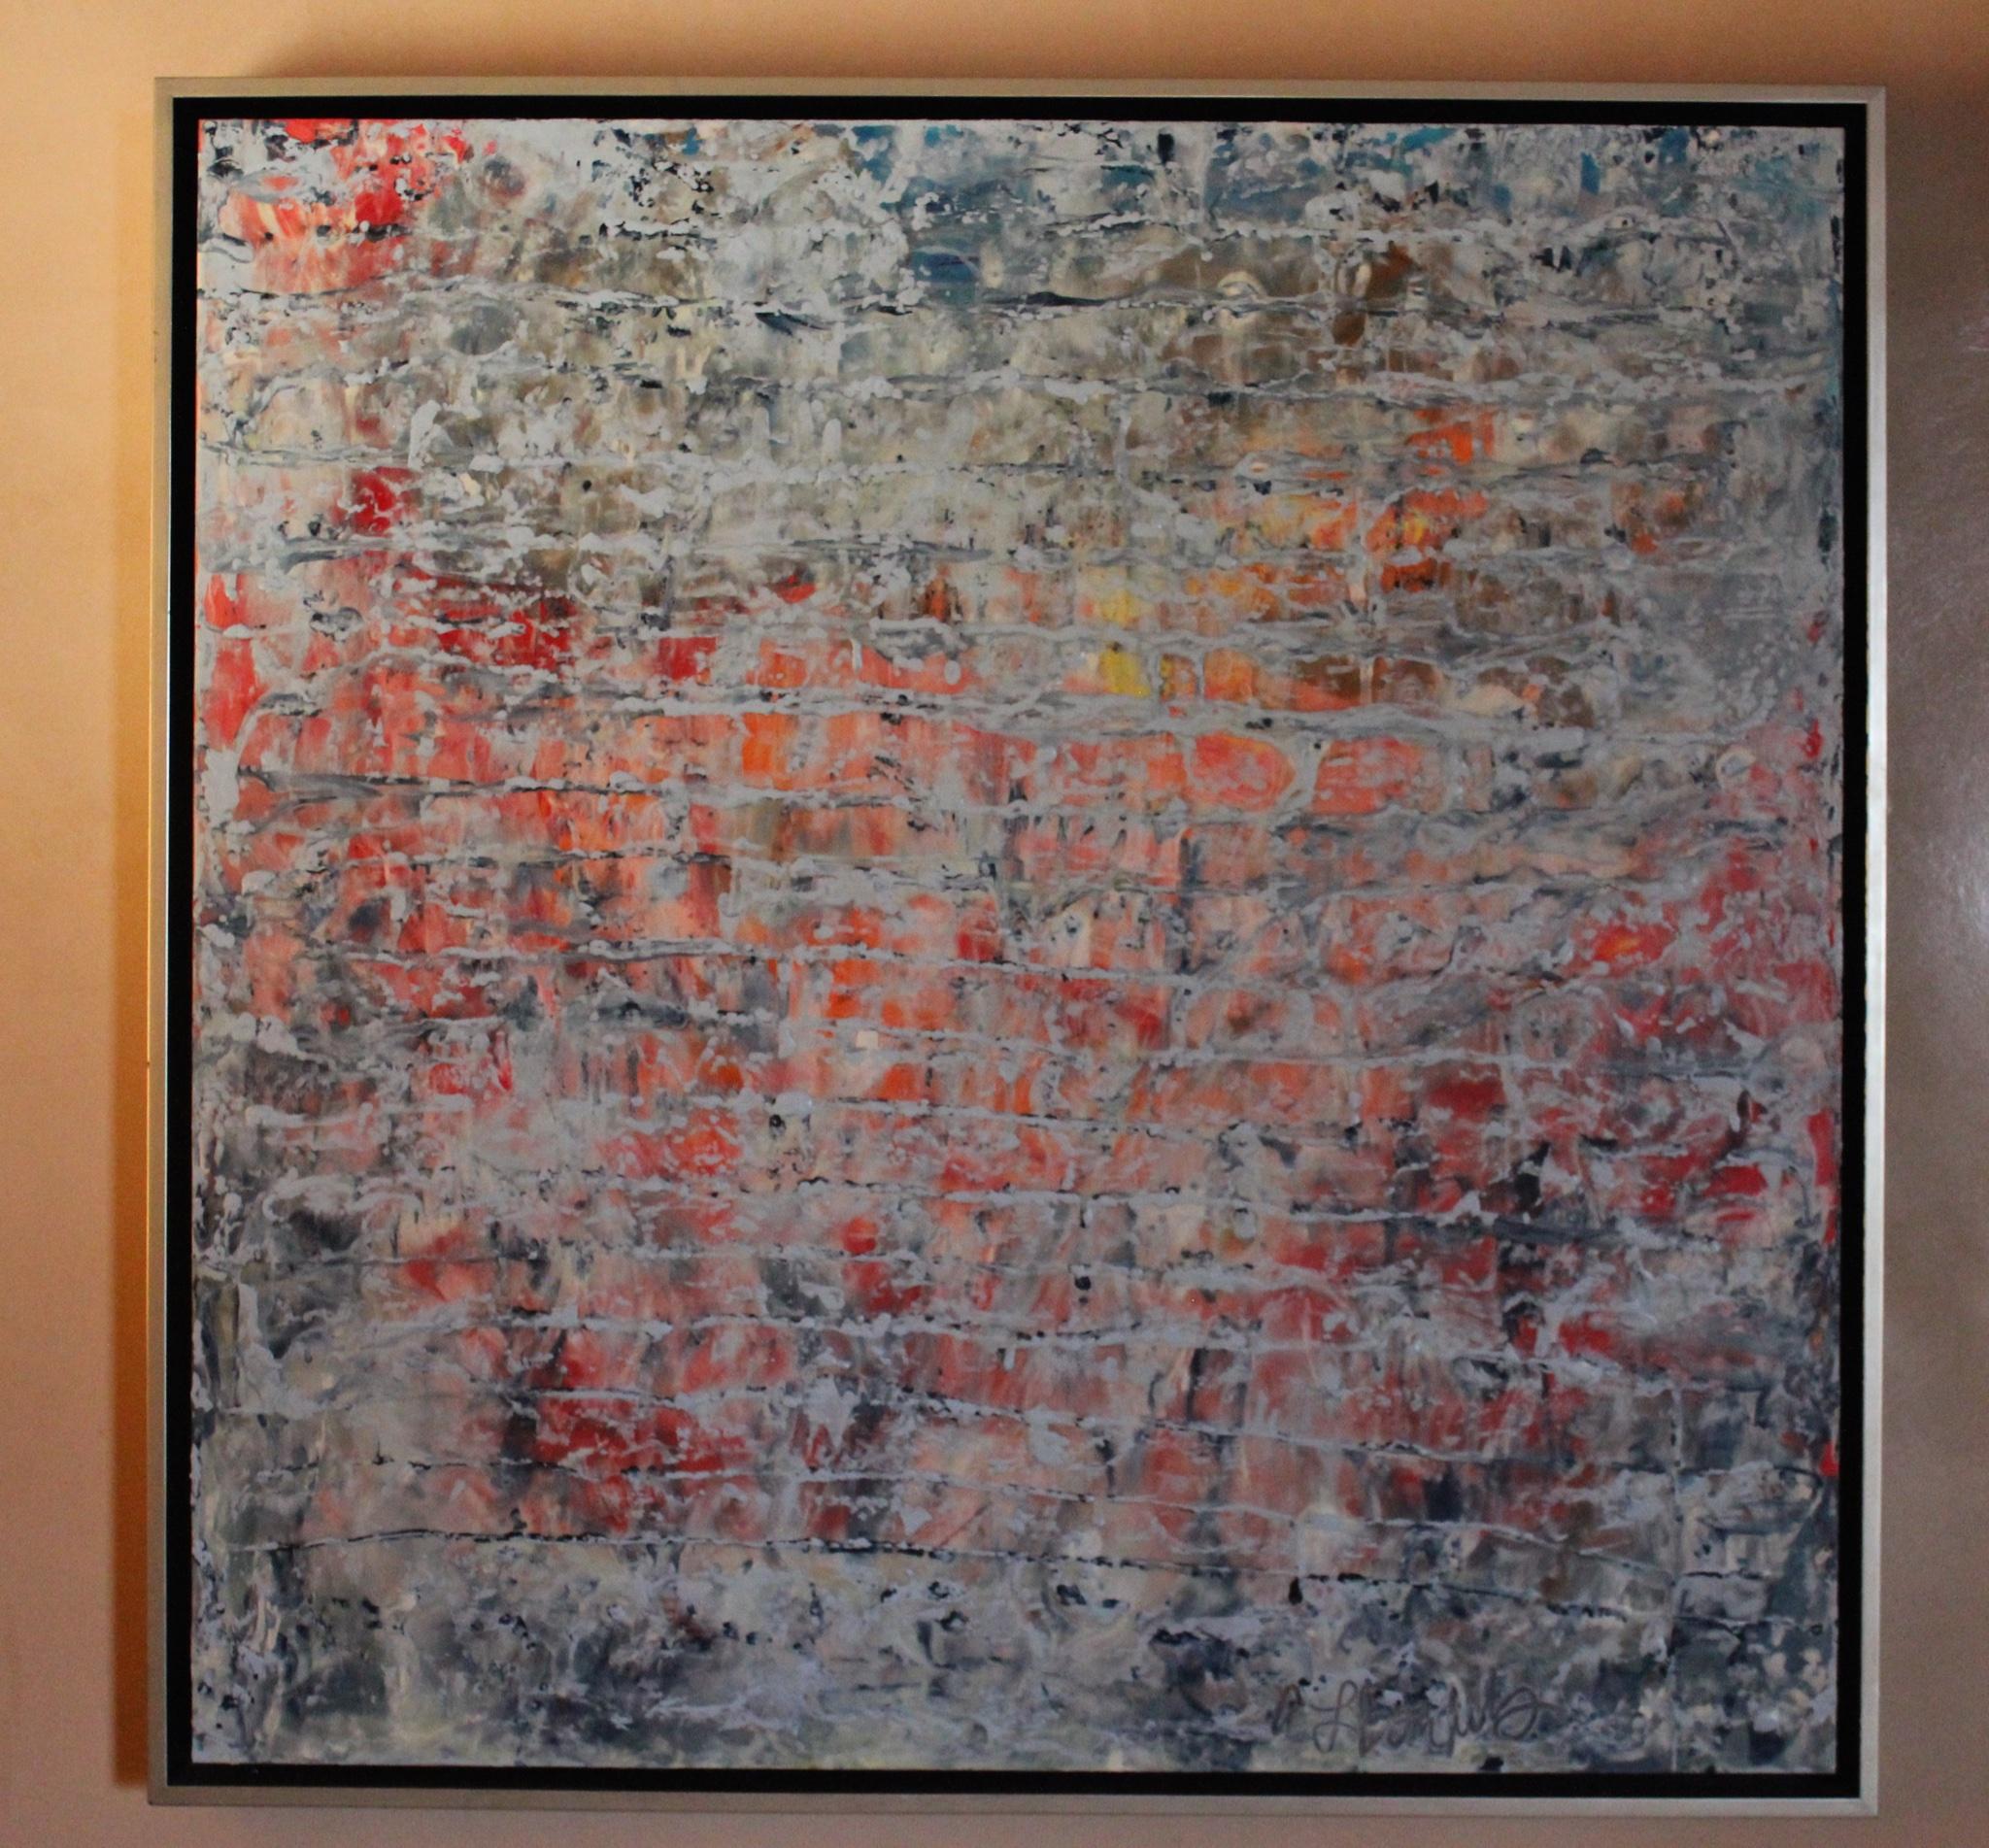 Series: Layered Desert

Oil and encaustic

Size: 36" x 36" with silver floater frame

Using unconventional hardware - a blow torch, iron and other heated tools - along with paper, encaustics, photography, resin and natural materials, Bonfils’